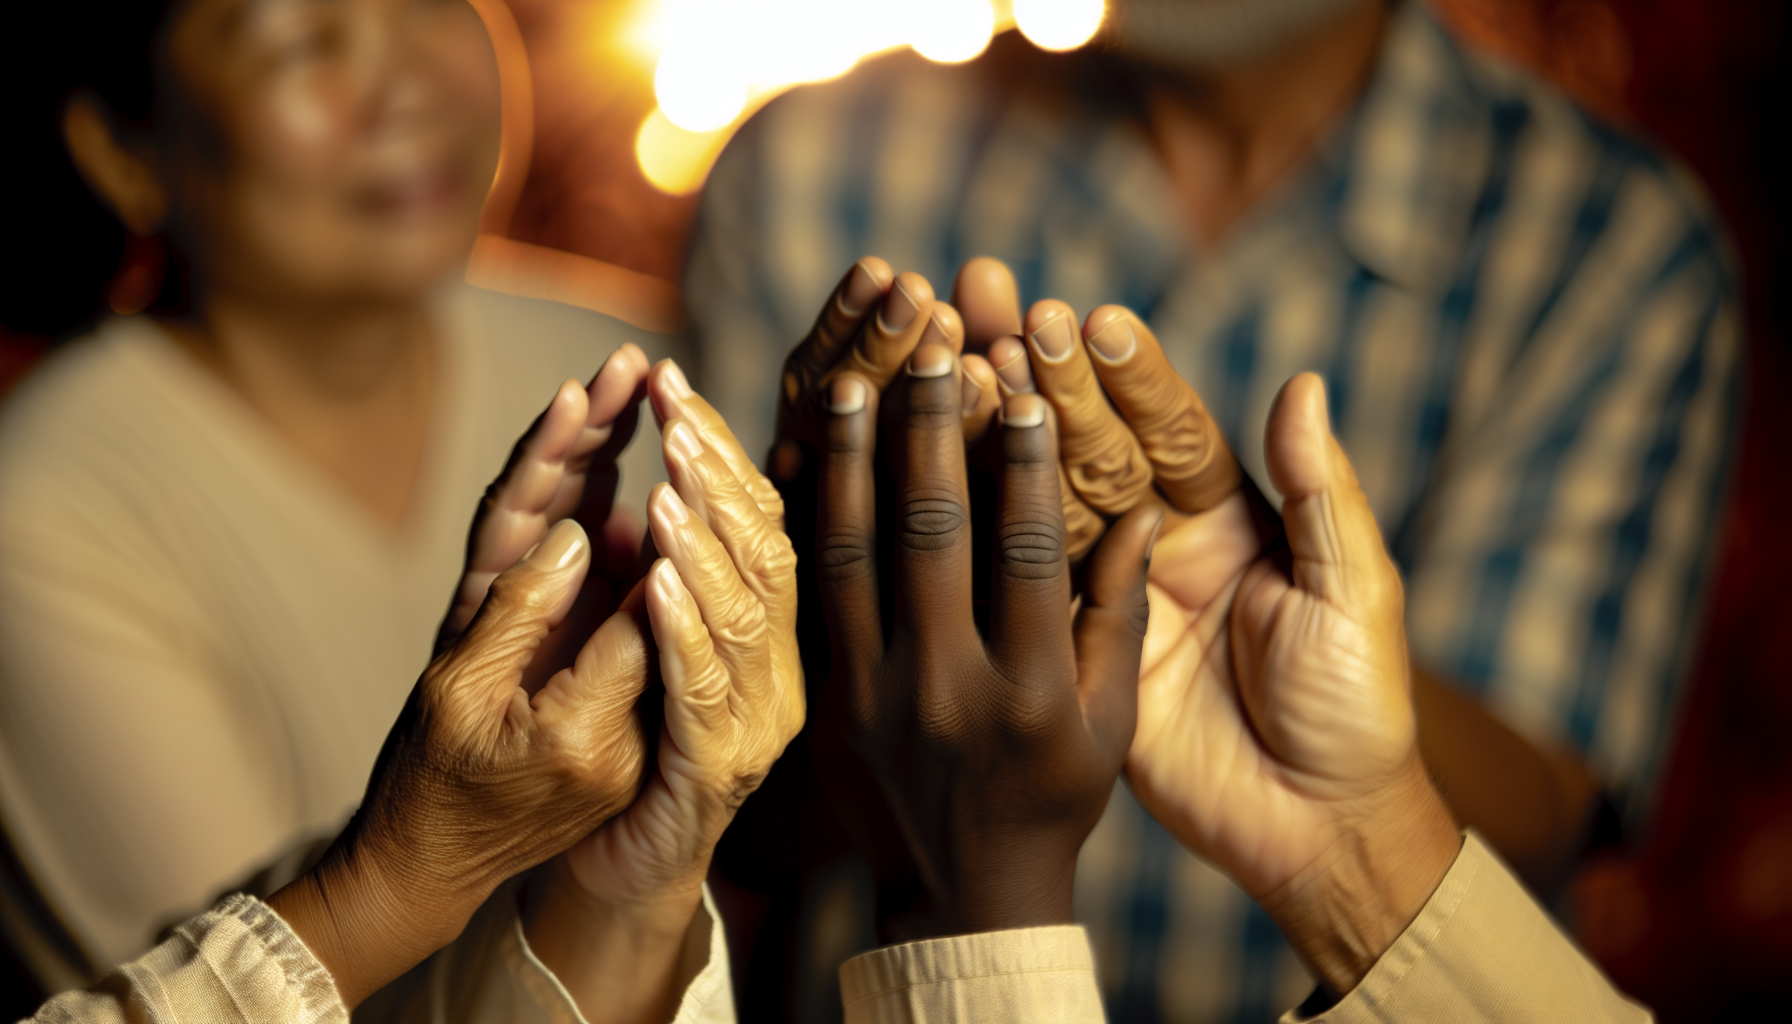 Hands reaching out in prayer for loved ones' health